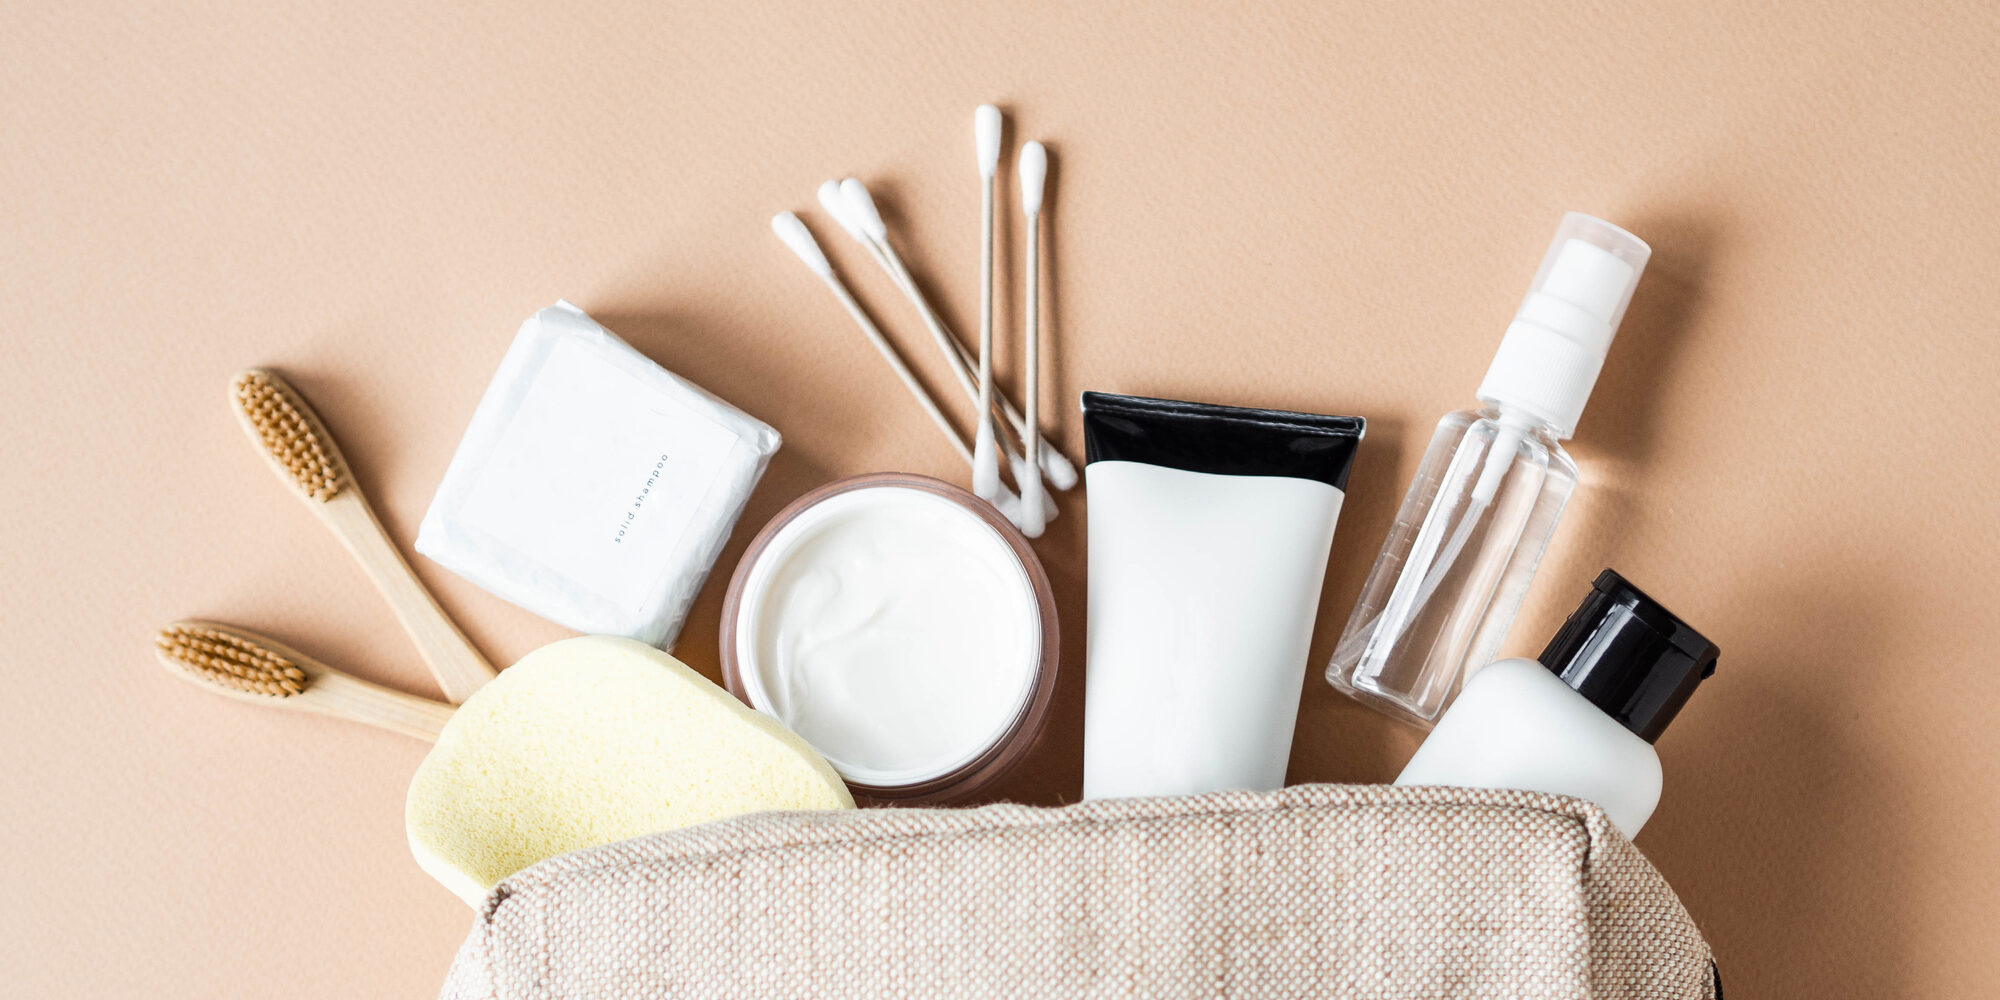 Hygiene products, dry shampoo, cotton buds, toothbrushes poking out of bag on a beige background.